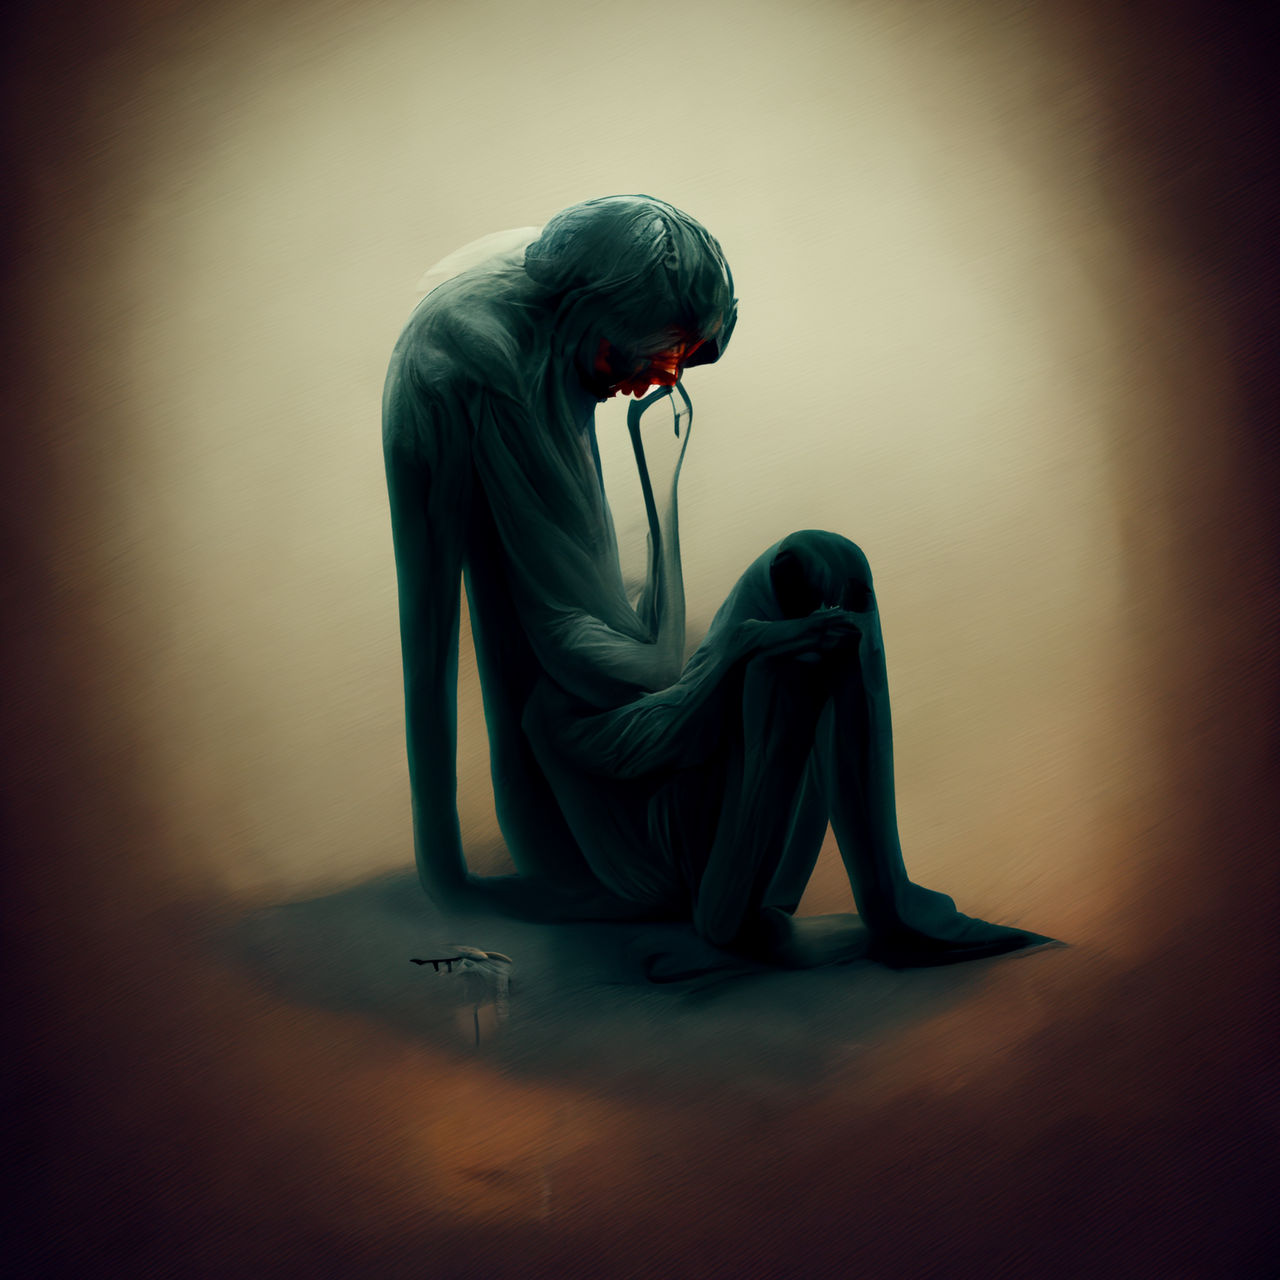 Depression Obsession by pextris on DeviantArt